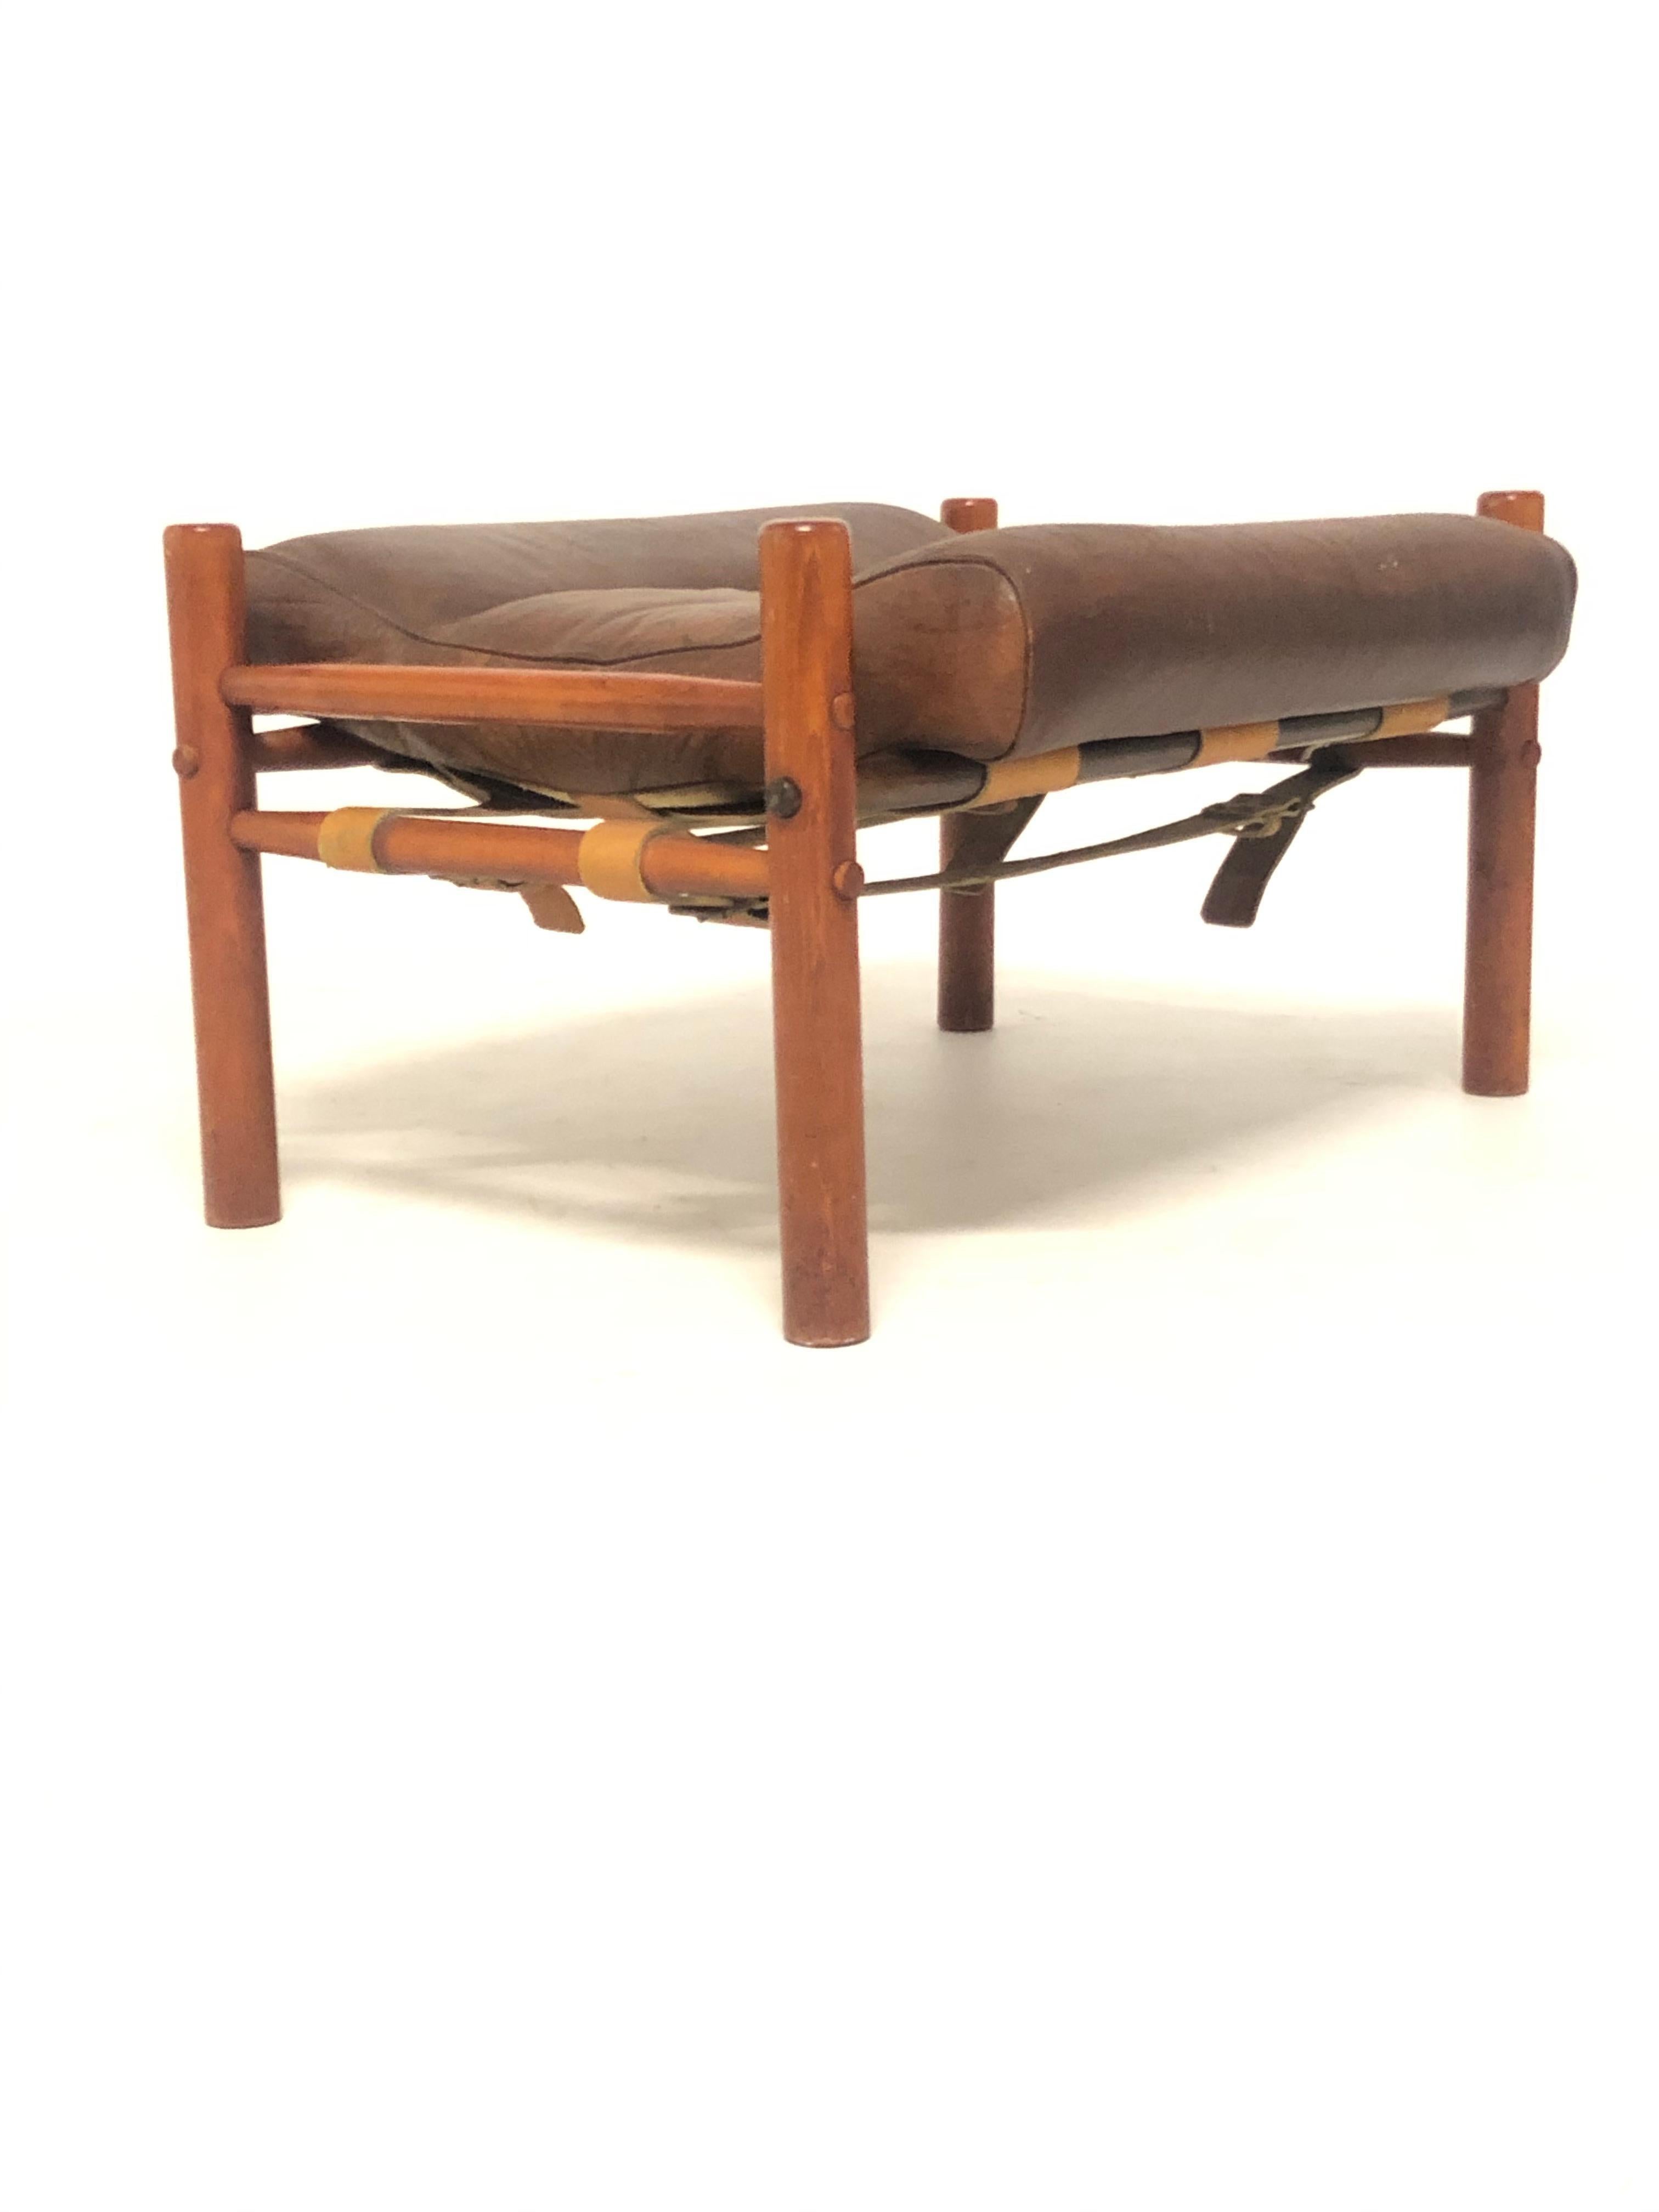 Mid-Century Modern 1970s Leather Footstool Designed by Arne Norell Manufactured by Norell Ab Sweden